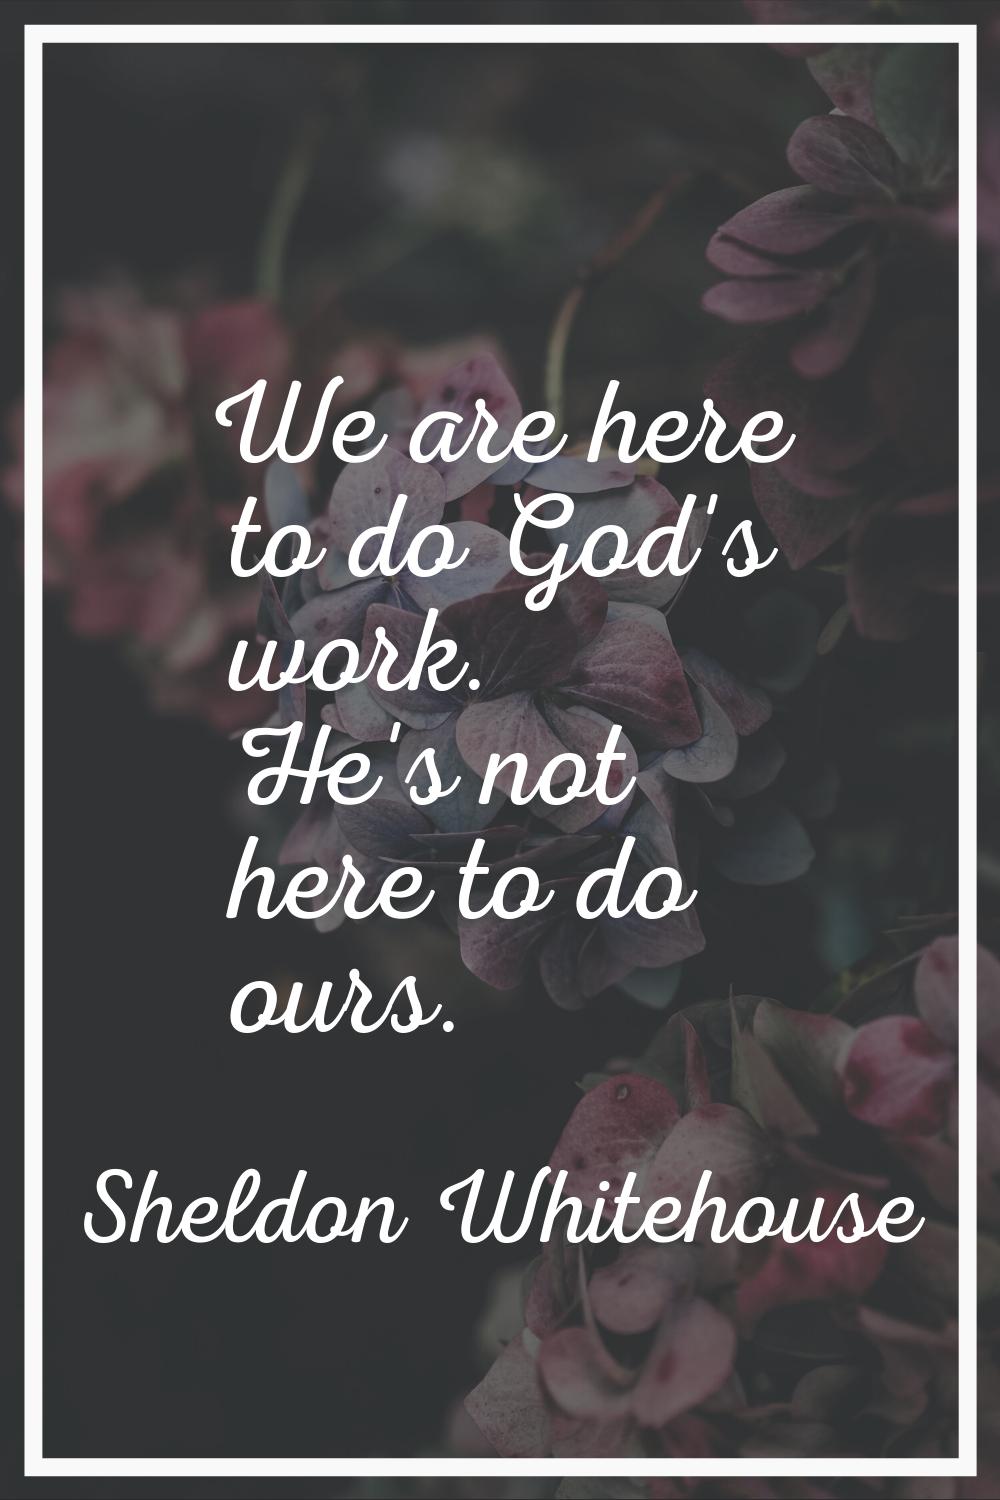 We are here to do God's work. He's not here to do ours.